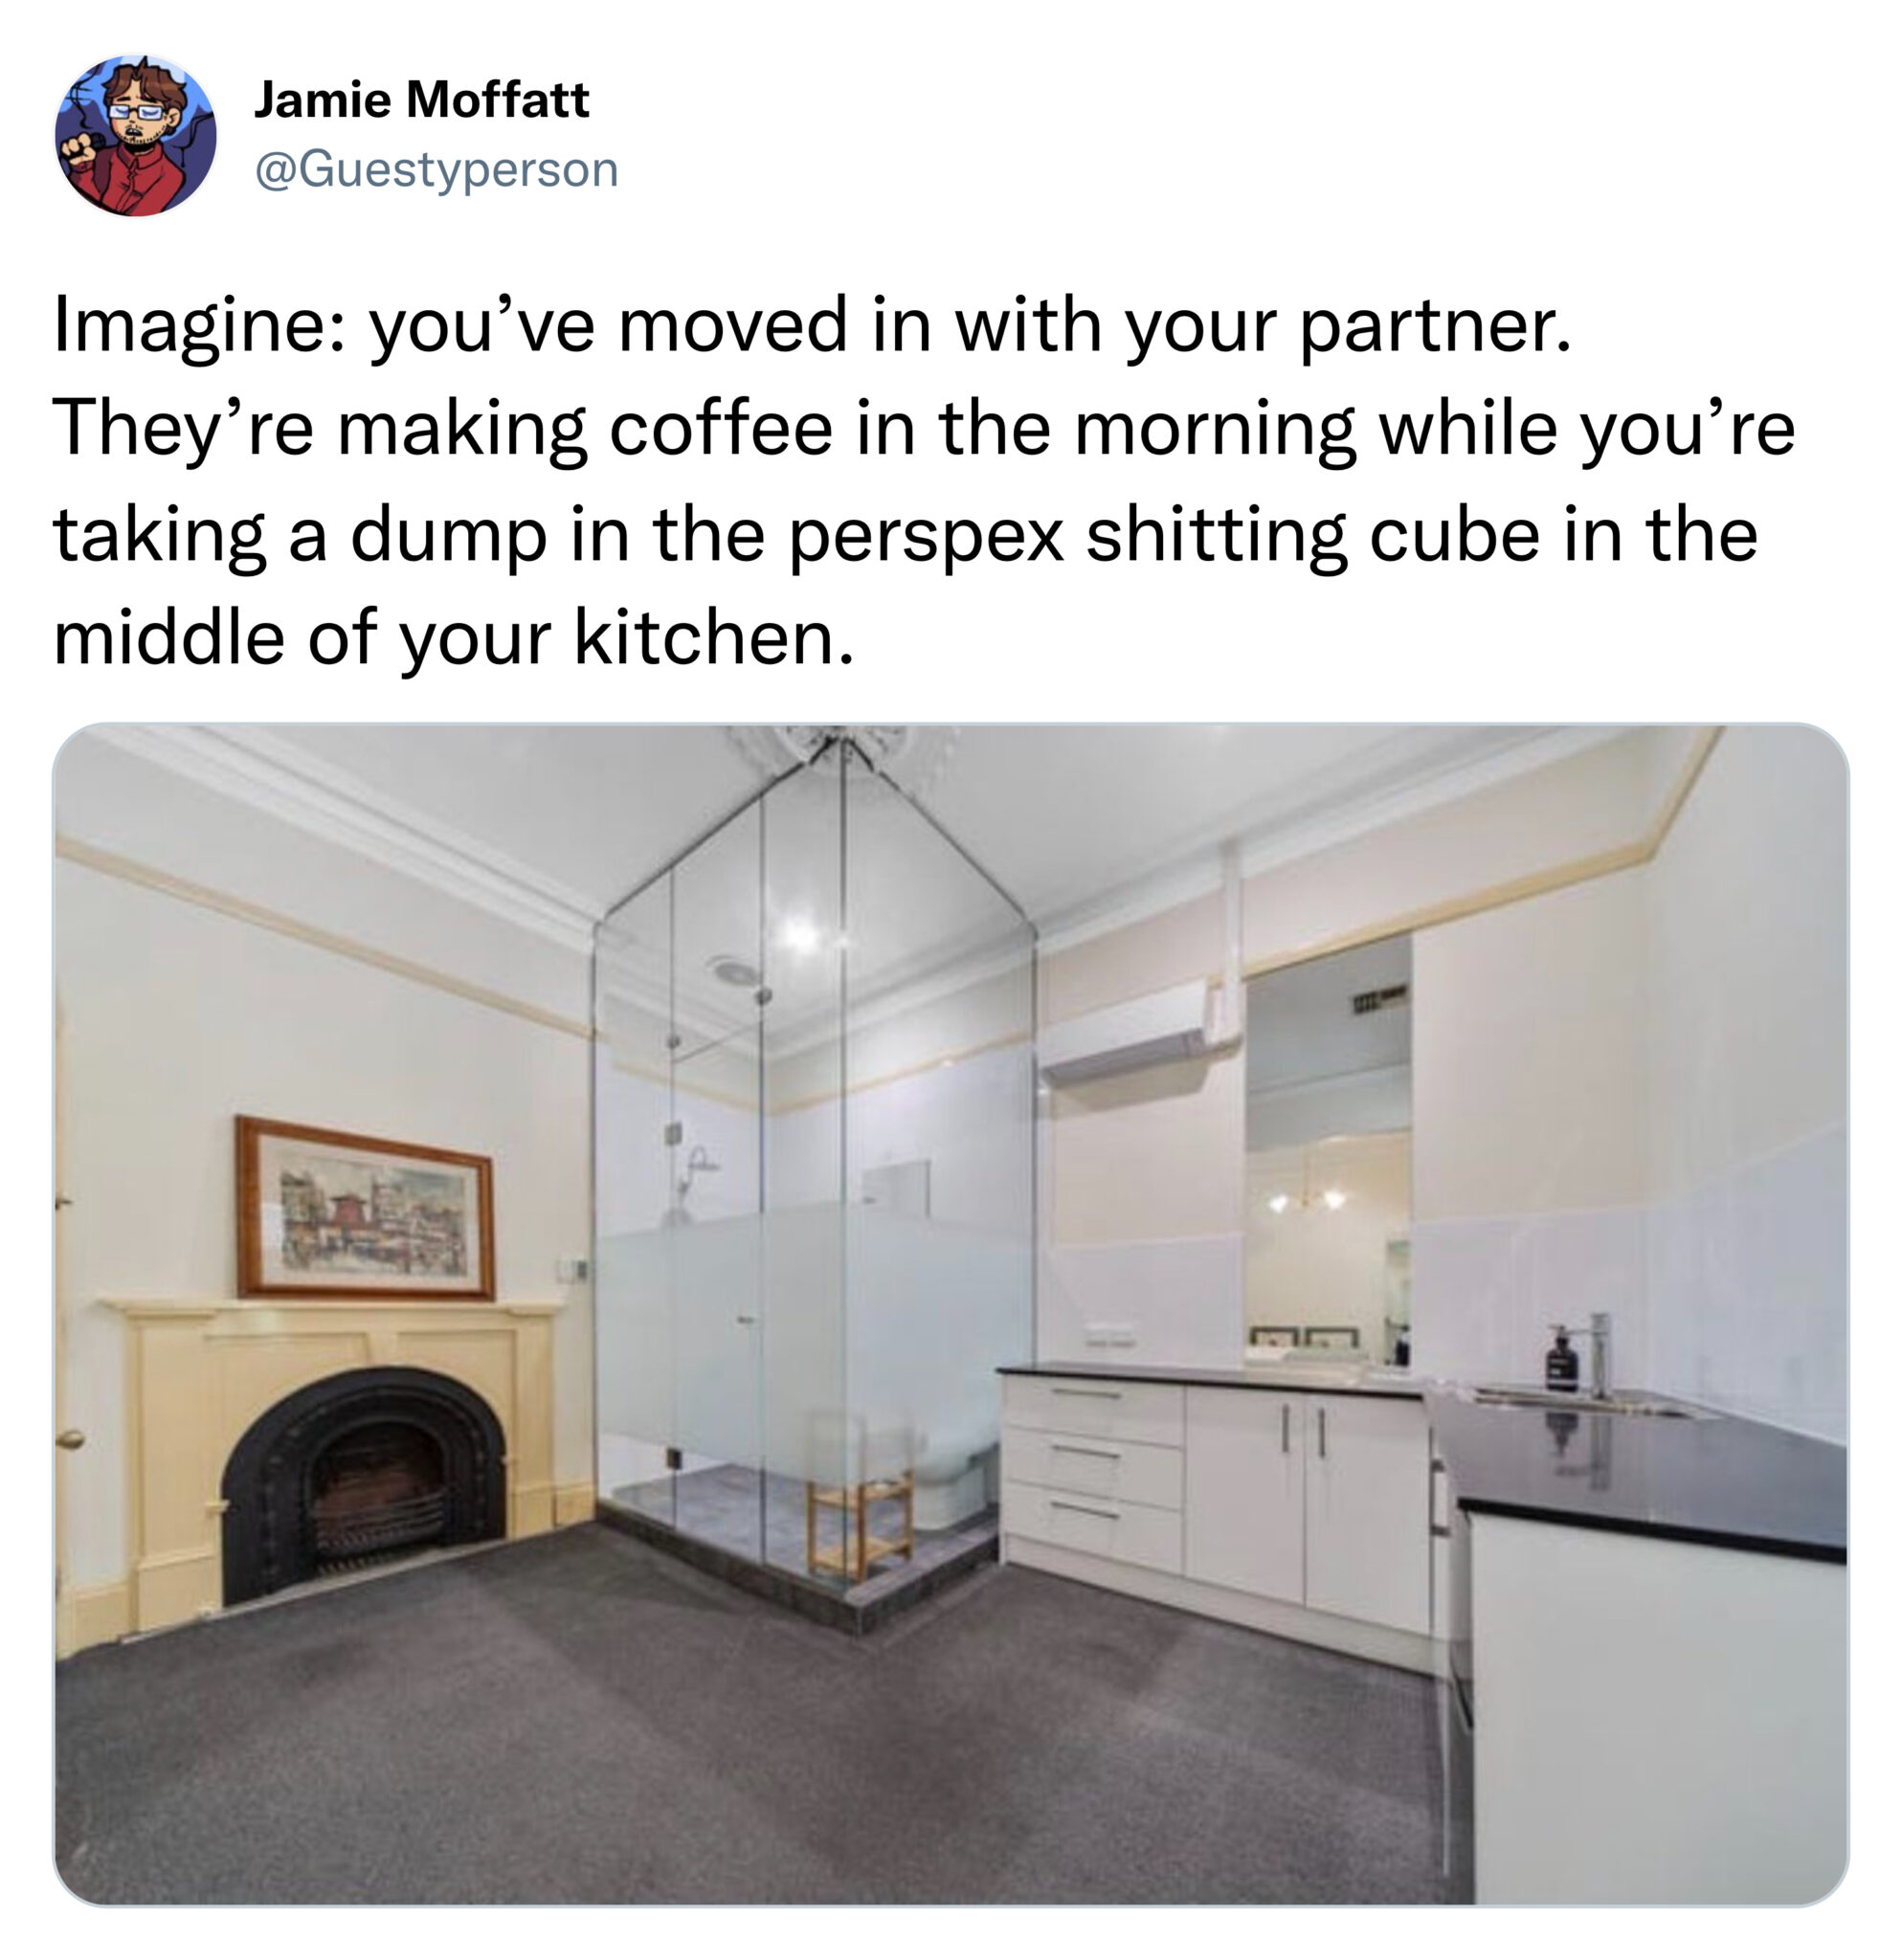 savage tweets - Kitchen - Jamie Moffatt Imagine you've moved in with your partner. They're making coffee in the morning while you're taking a dump in the perspex shitting cube in the middle of your kitchen.